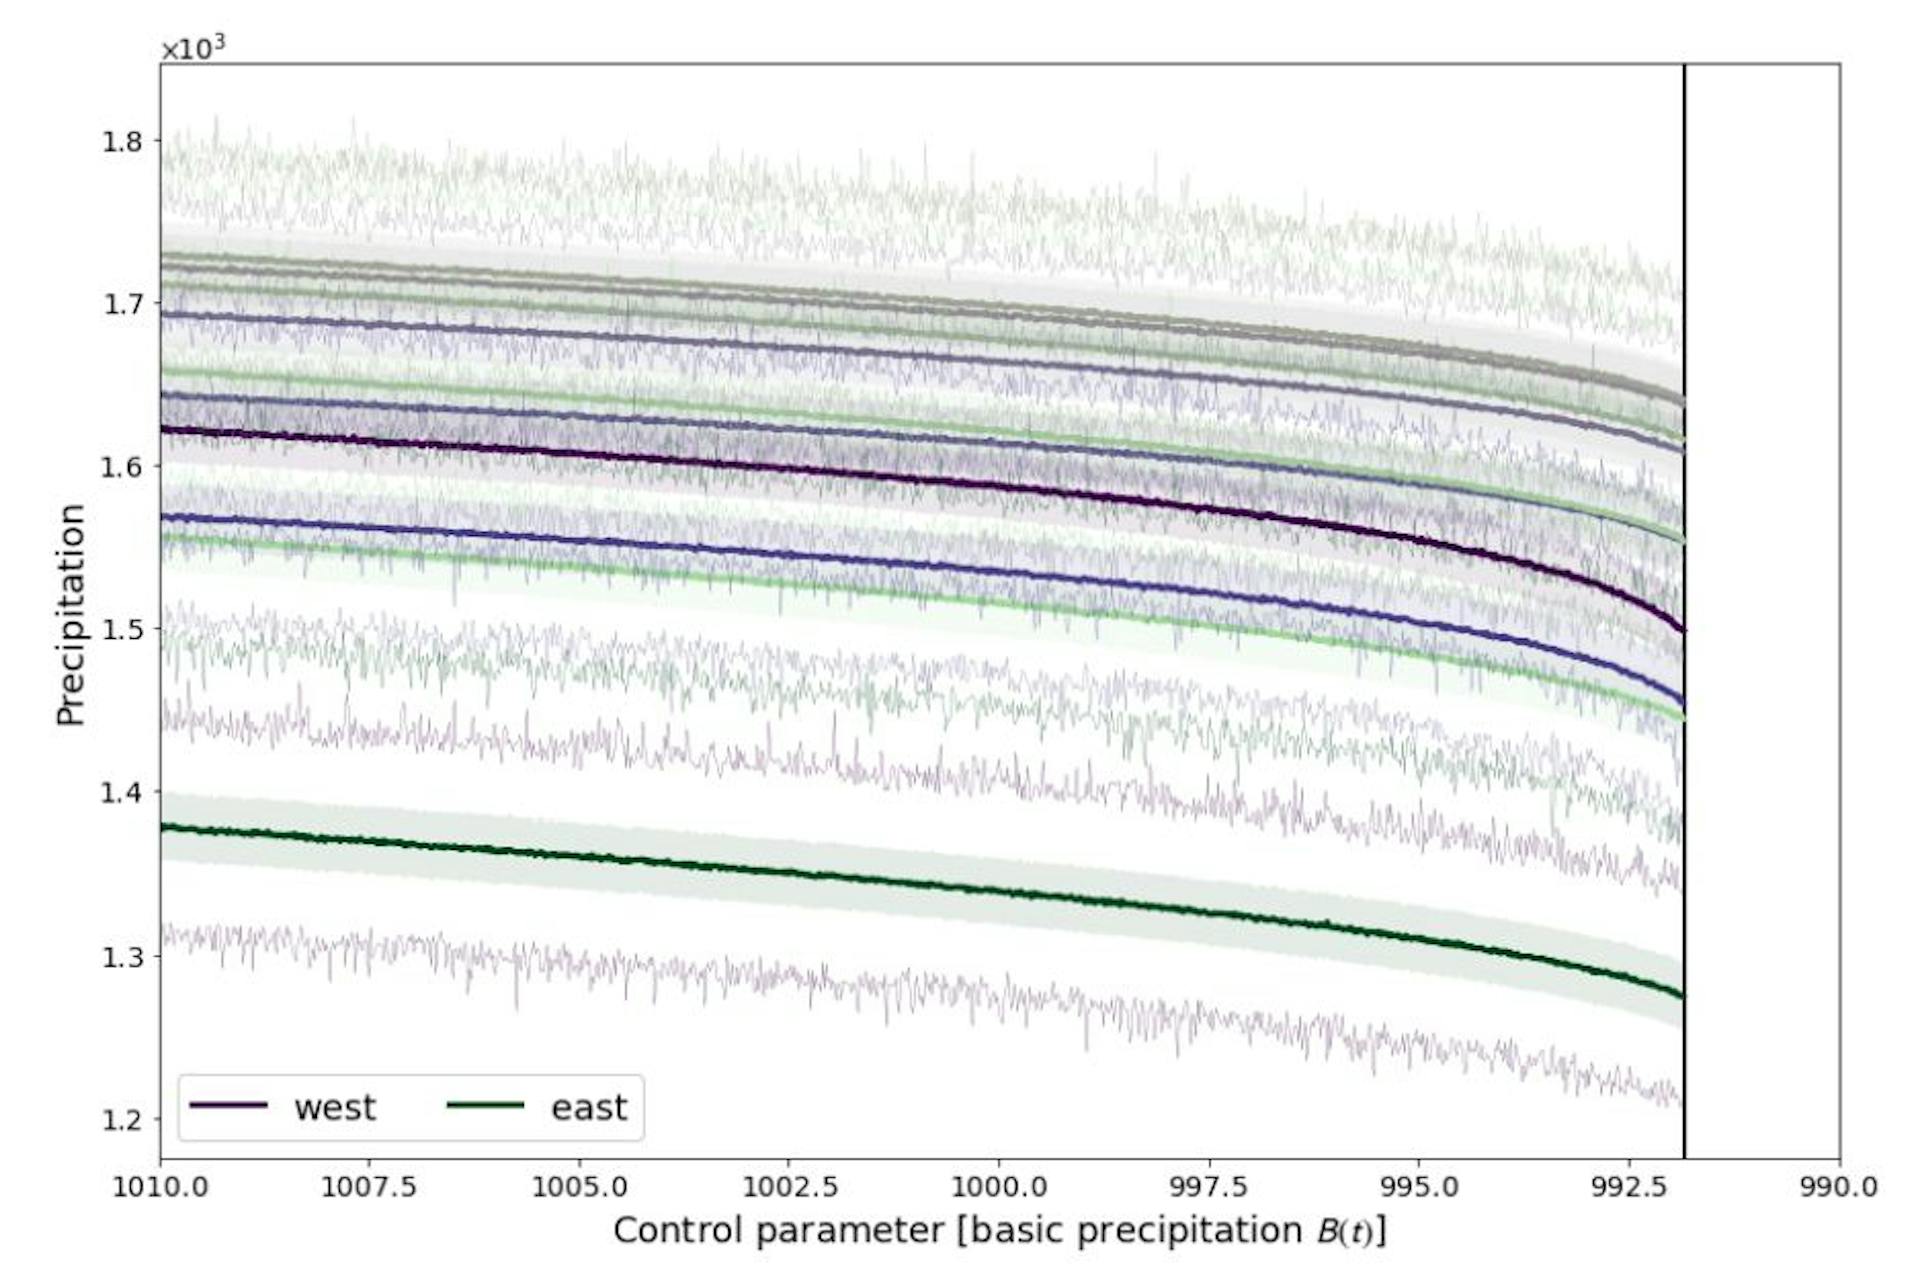 Figure S2: Precipitation reduction in the conceptual model. This Figure gives a zoom-in into cell-wise total precipitation, highlighting its stochasticity as well as the almost linear decrease up to the Tipping Point.